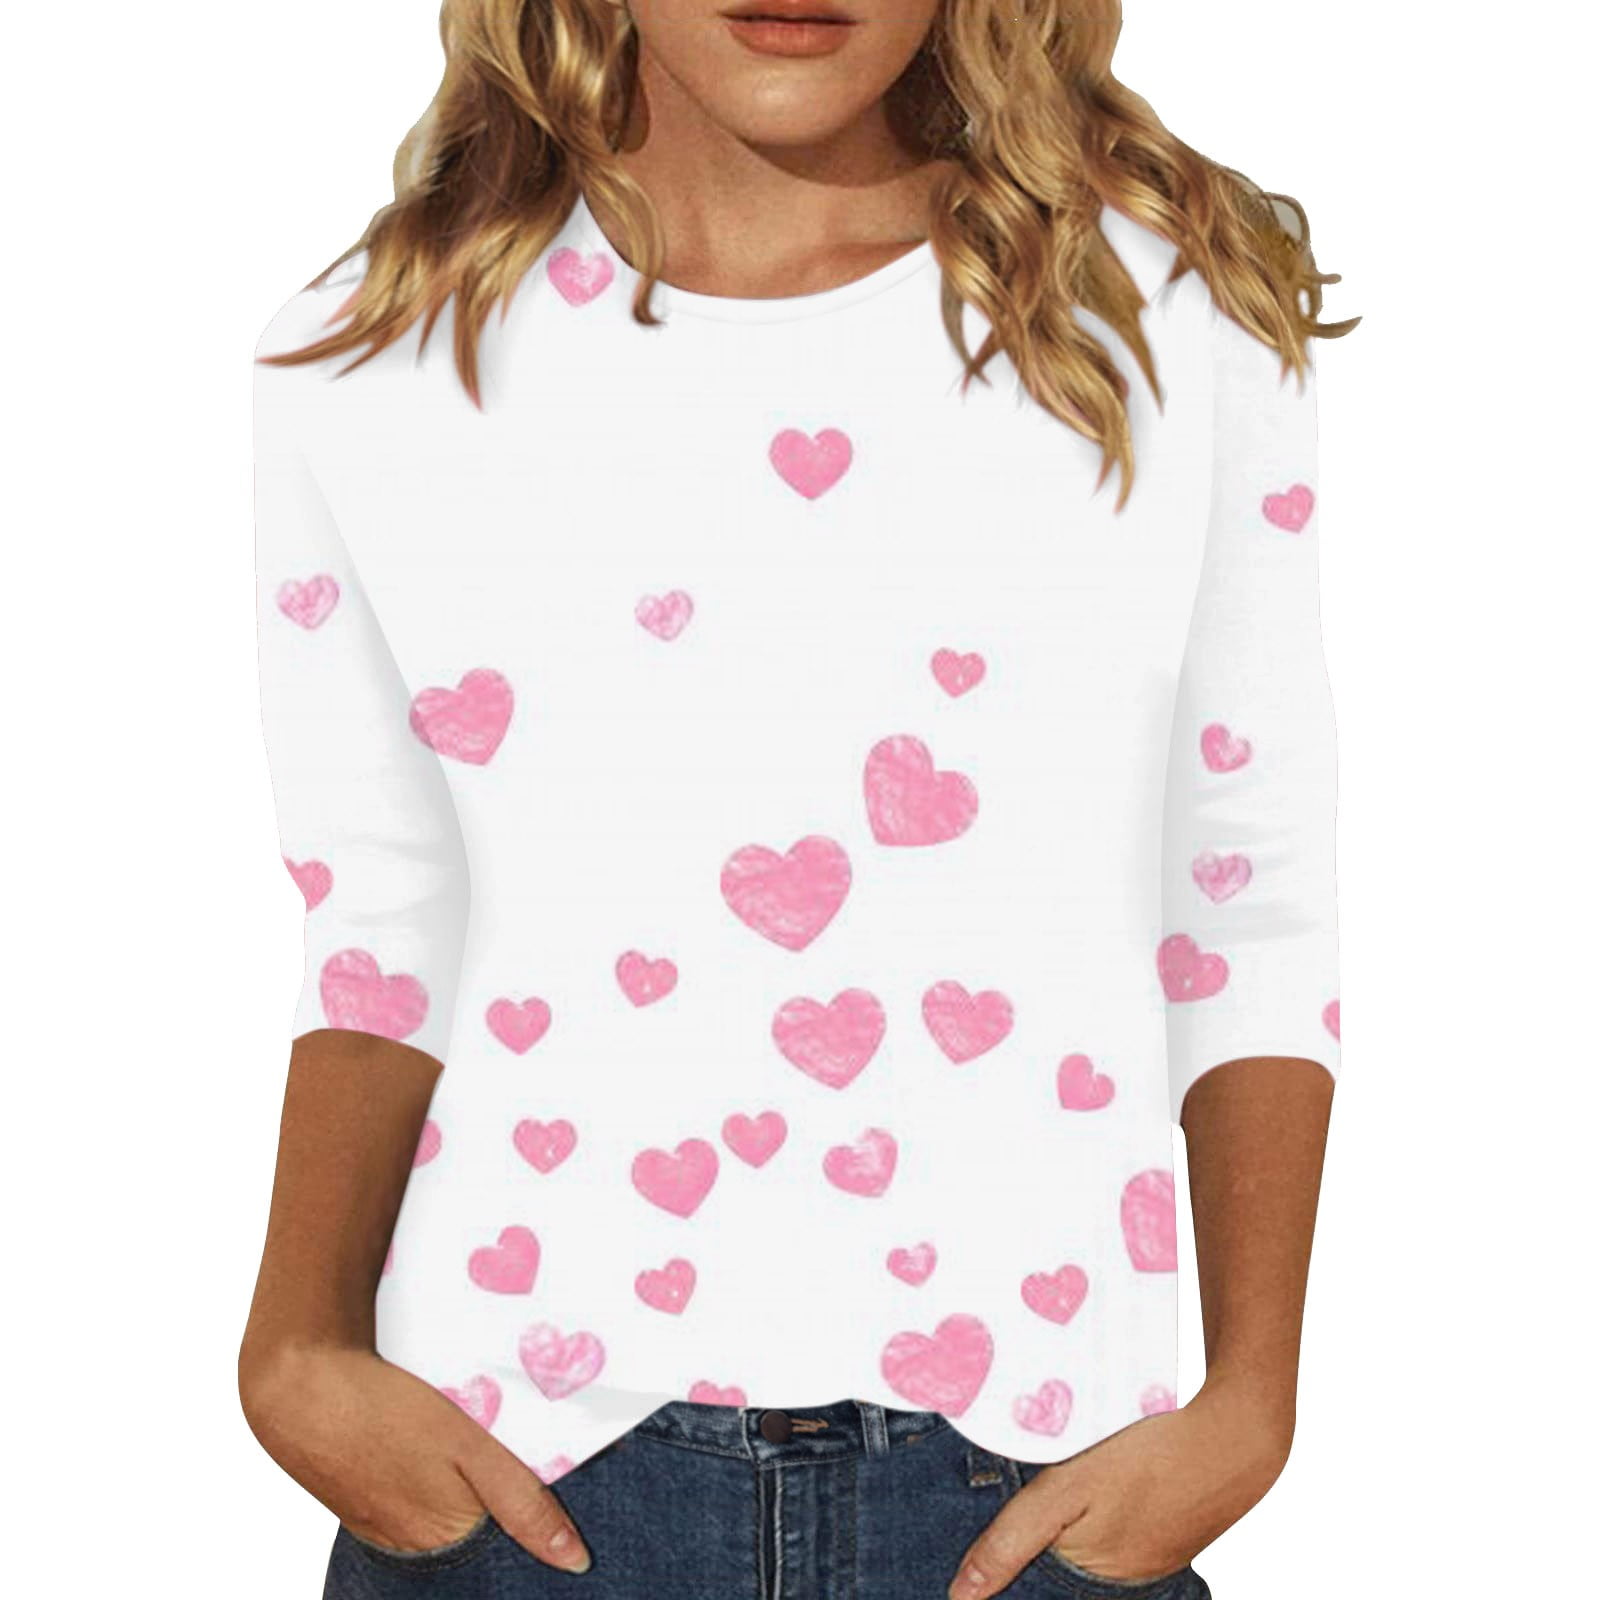 hcuribad Valentine's Shirts for Women Womens Shirts t Shirts for Women ...